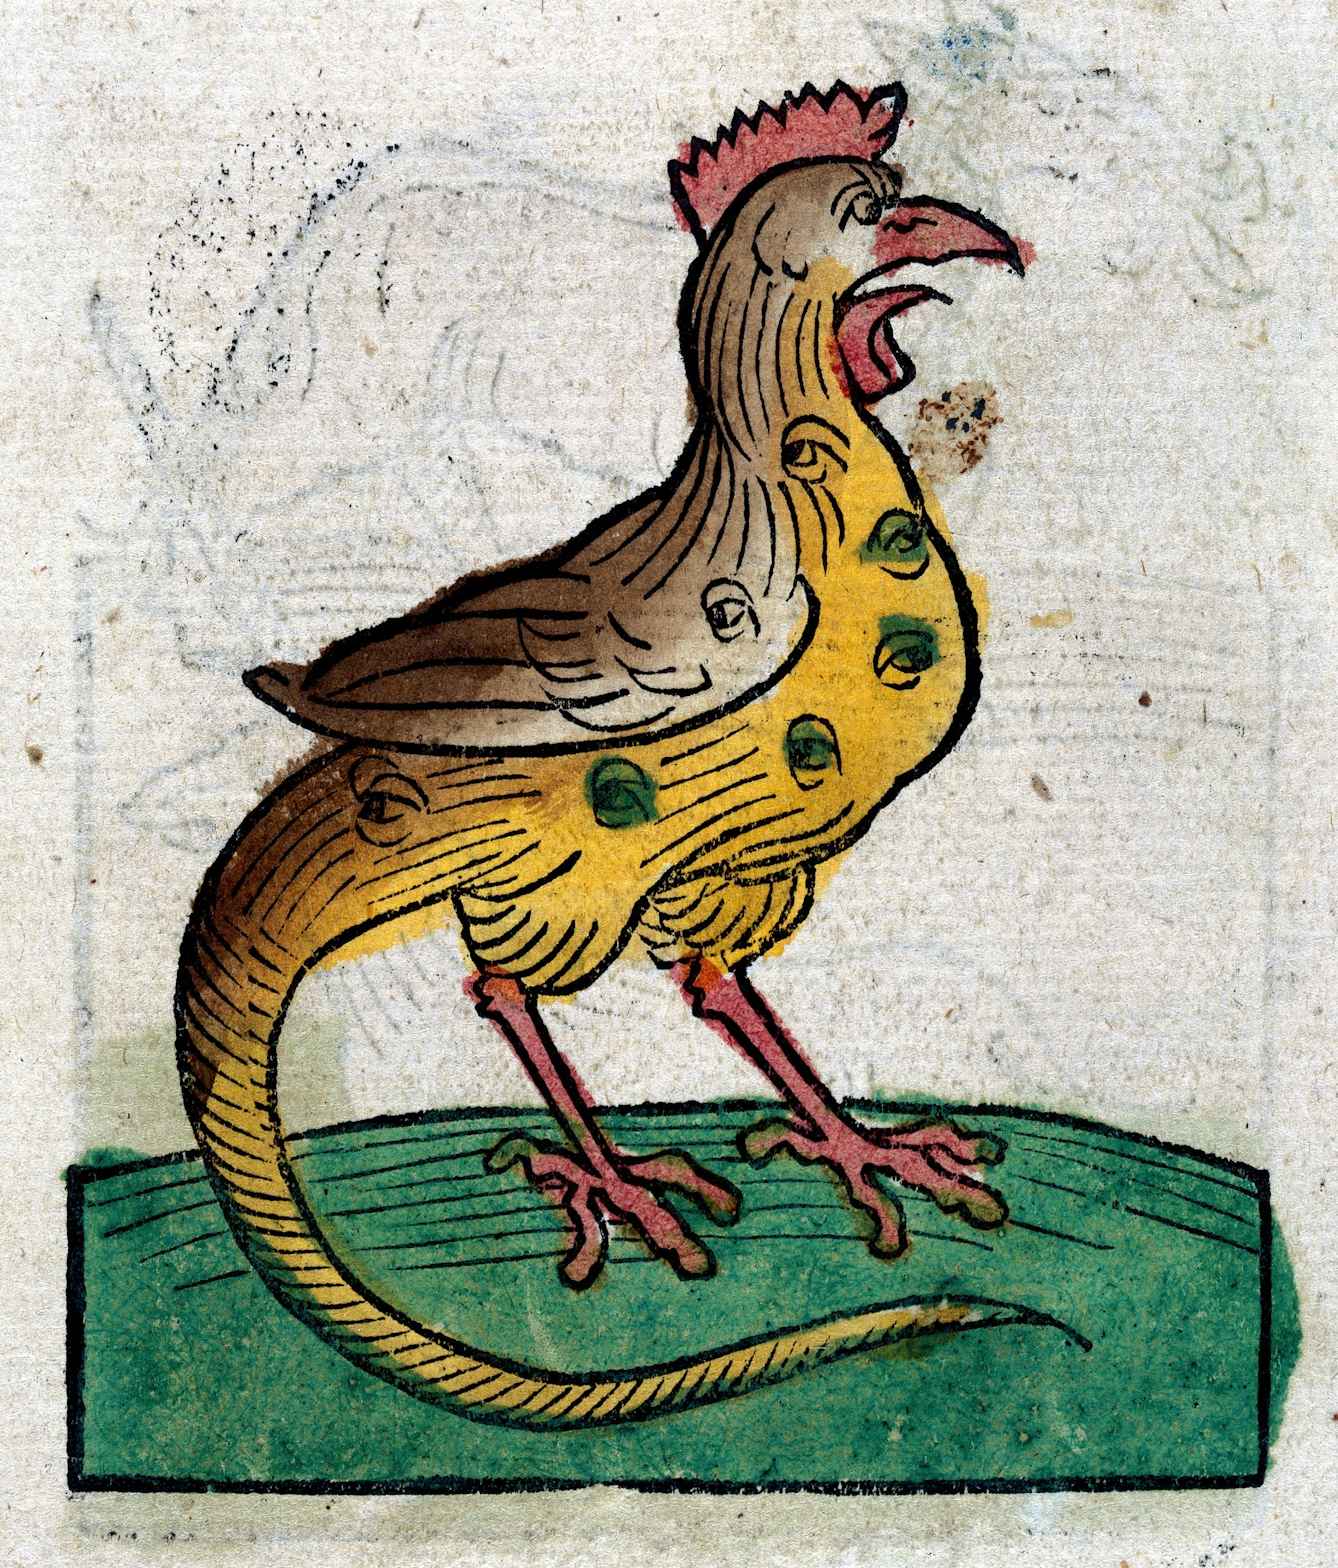 Painted woodcut style illustration of a cockrel, which appears to have eyes all over its body and on its wing.